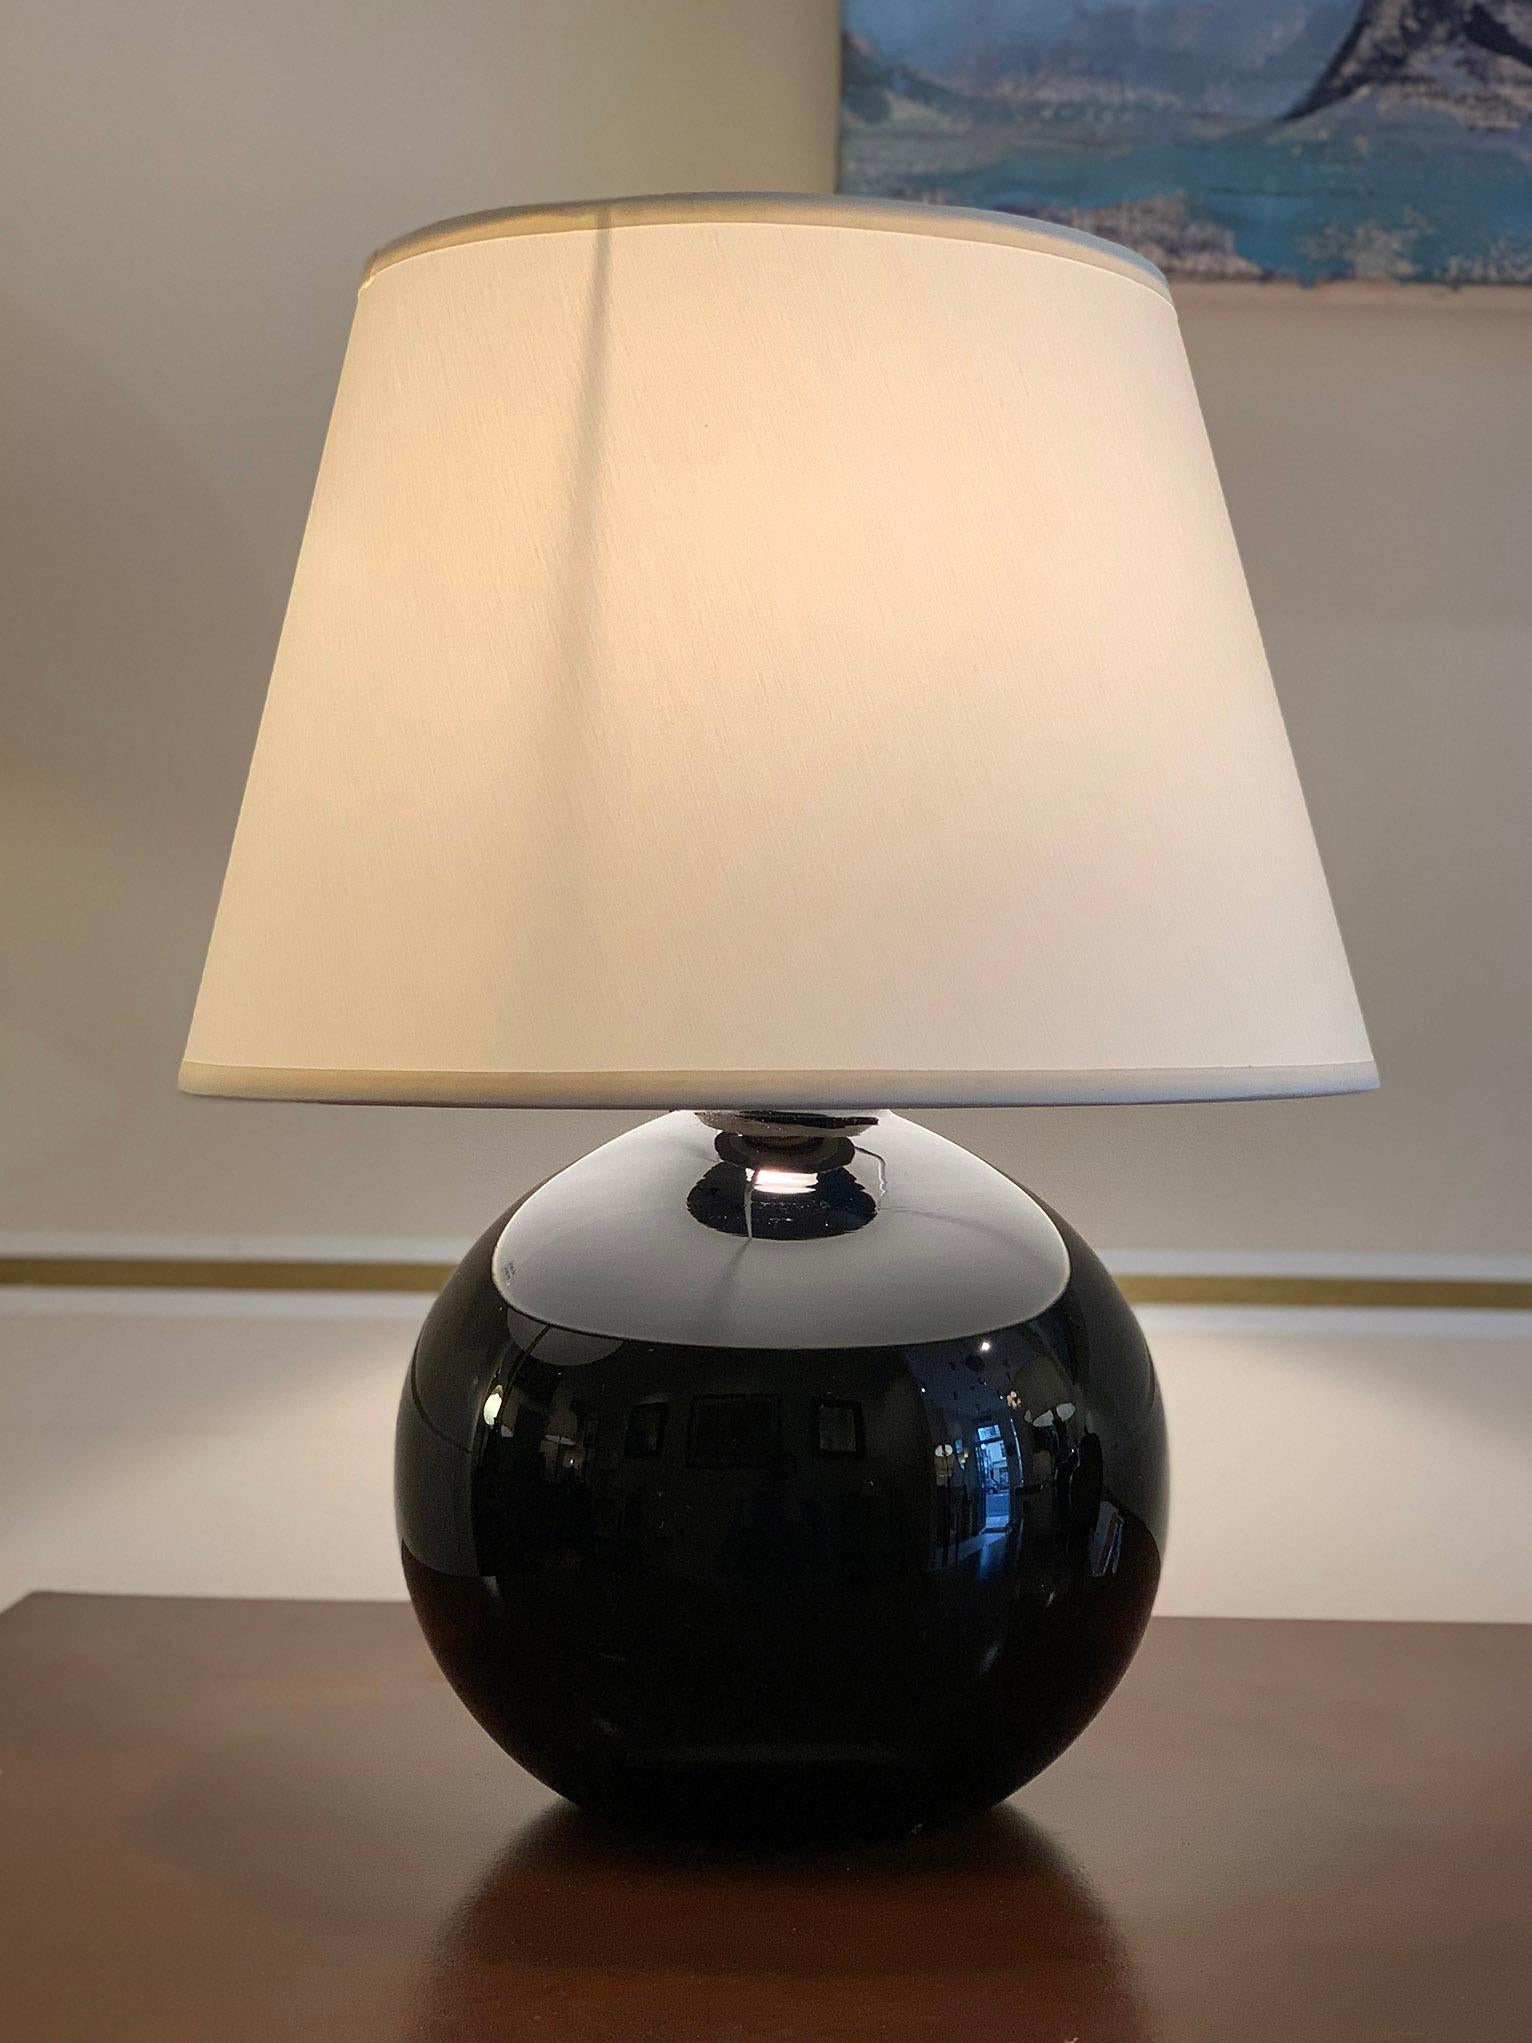 An Art Deco black opaline glass spherical table lamp by Jacques Adnet, (1901-1984)
France, circa 1930
Measures: With the shade: 41 cm high by 31 cm diameter
Lamp base only: sphere of 20 cm diameter.